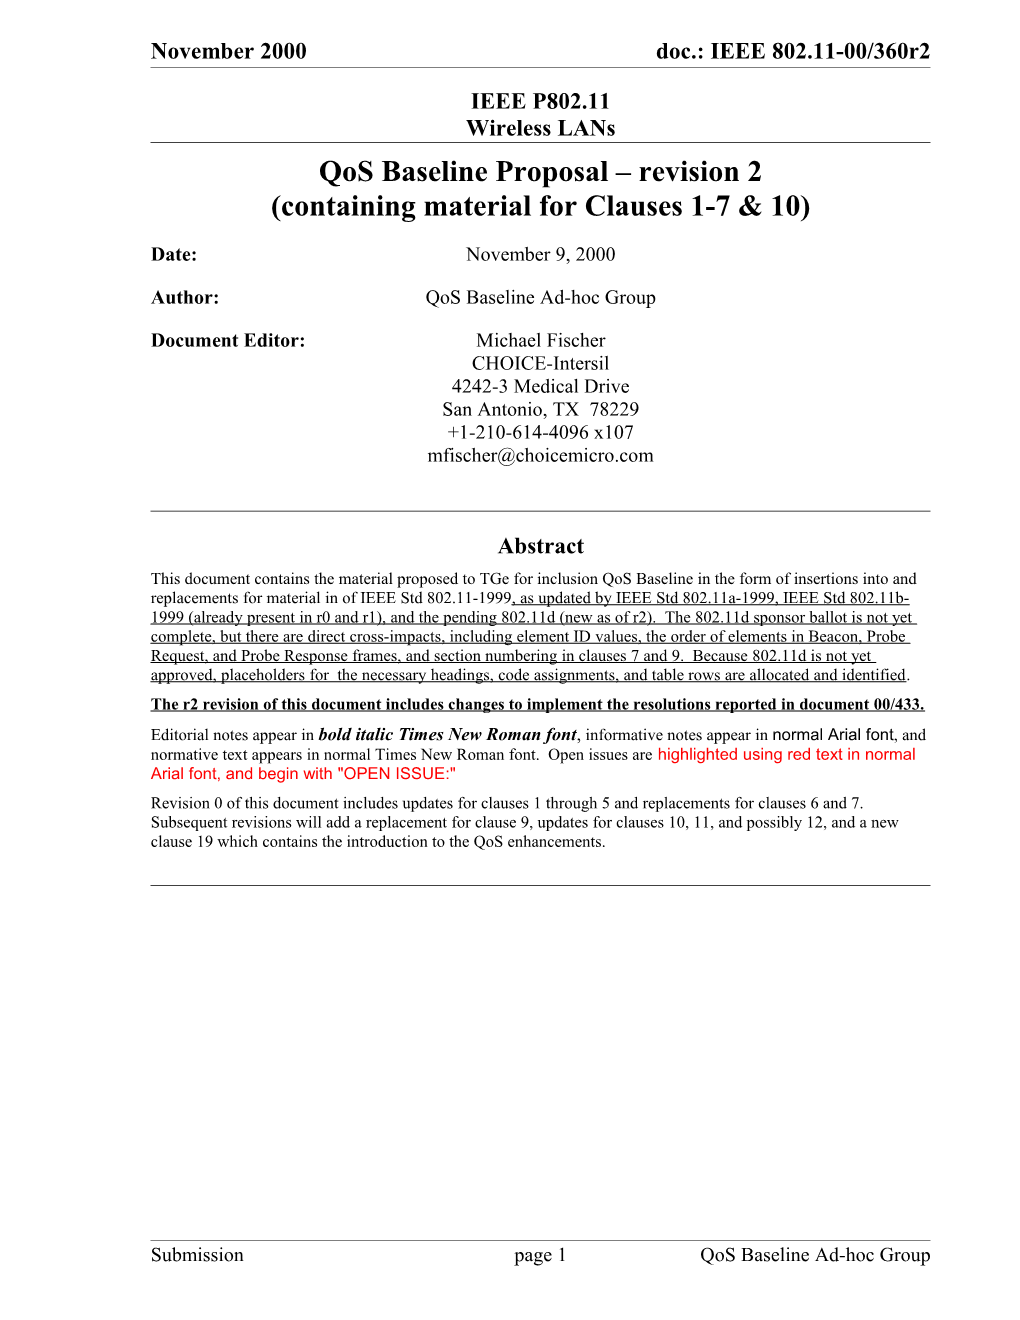 Qos Baseline Proposal Revision 2 (Containing Material for Clauses 1-7 & 10)